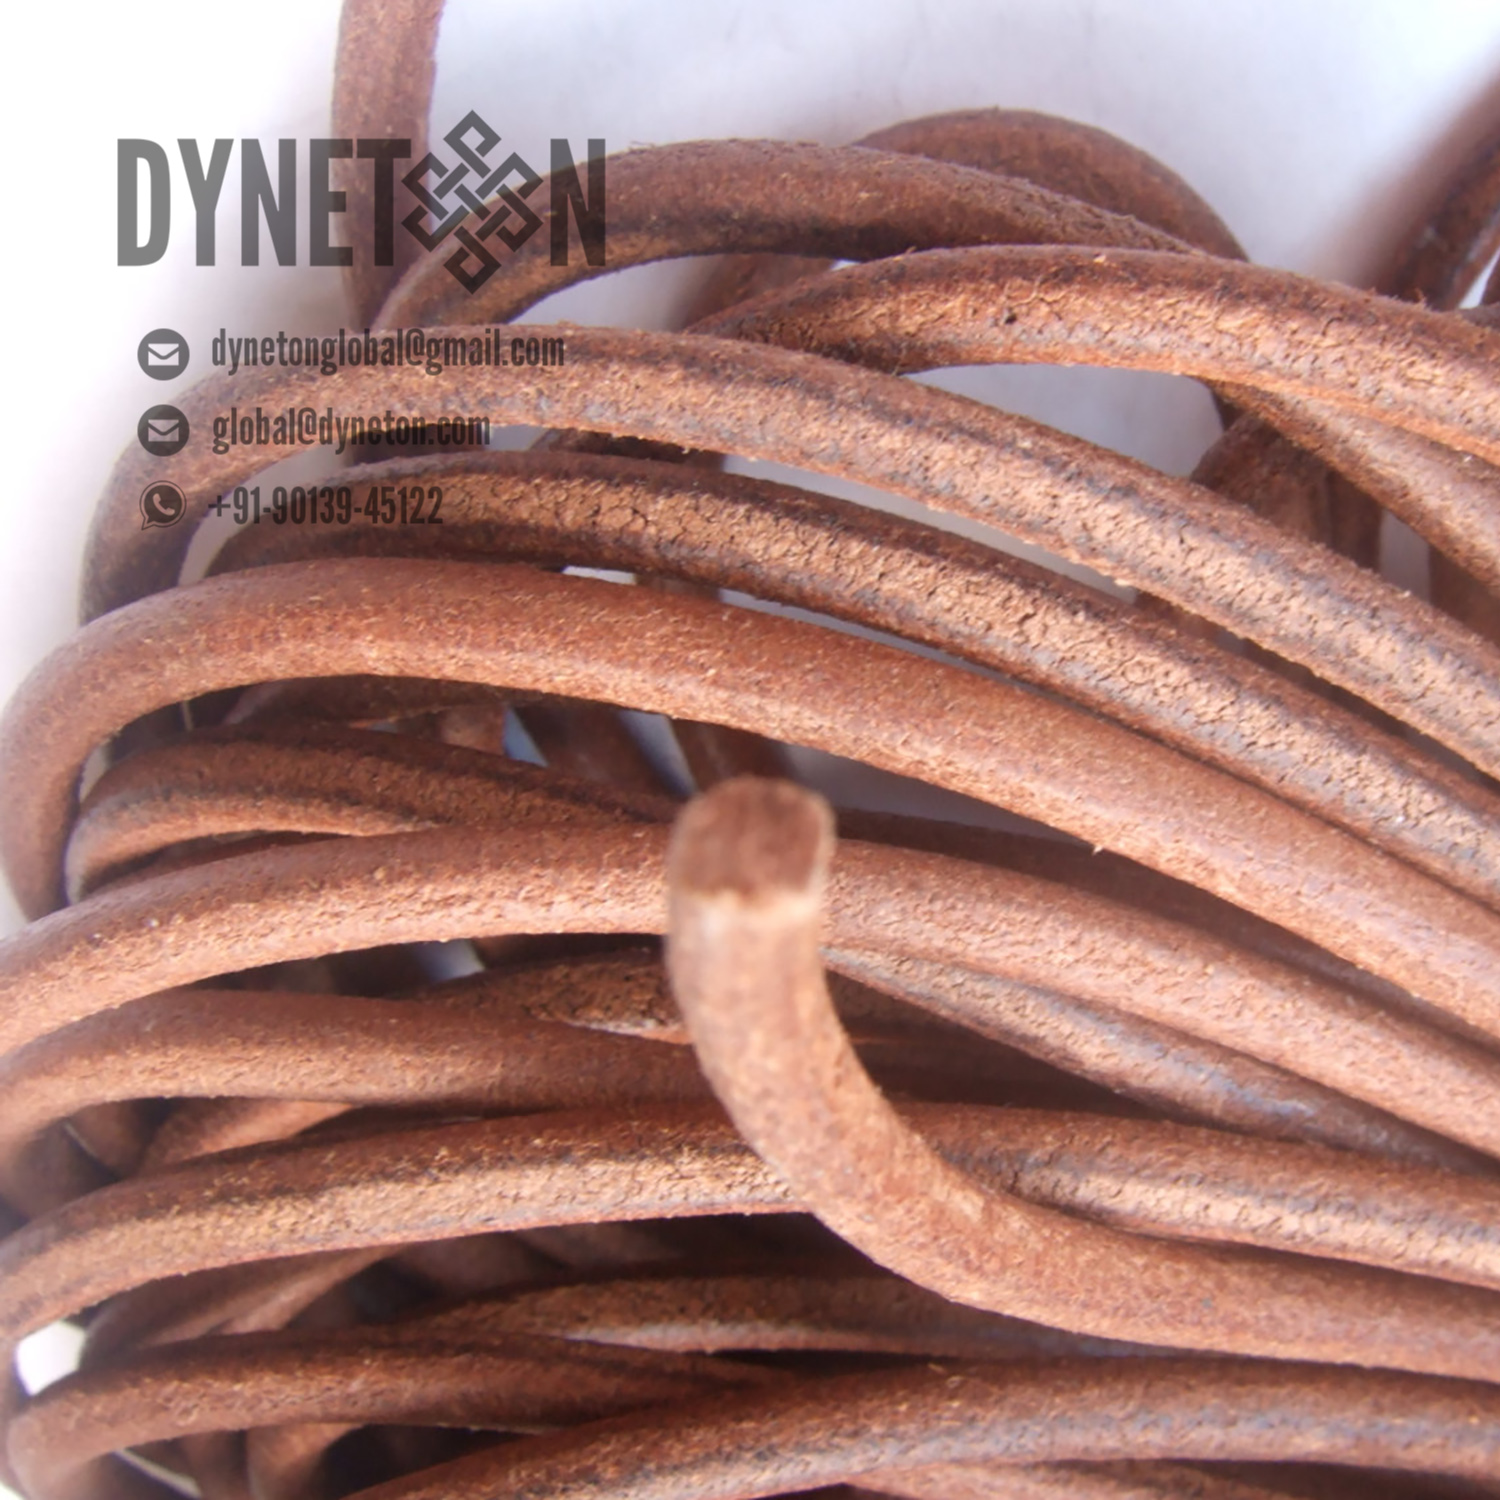 10mm Round Leather Cord - DYNETON / Round Leather Cords 10 mm